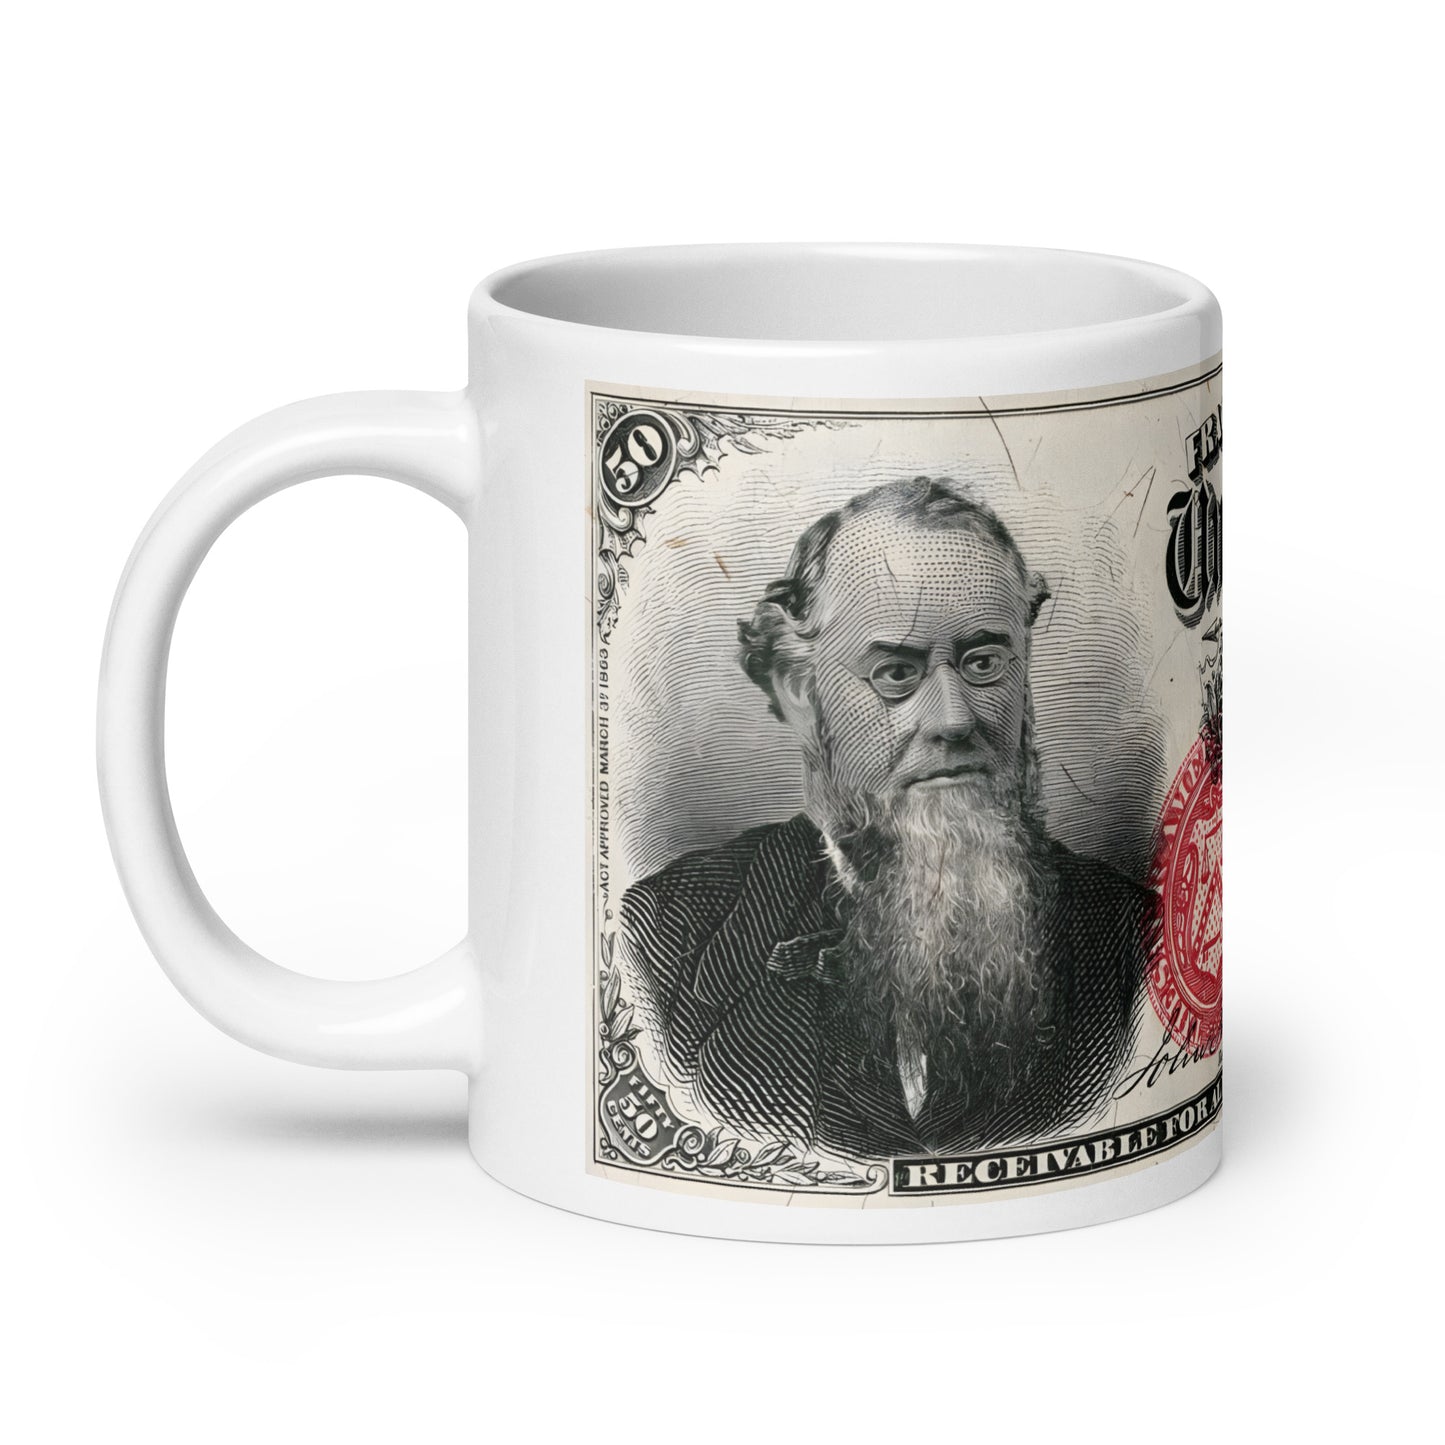 50 Cents 4TH Issue Fractional Currency (Edwin Stanton) Edition - Classic Currency Collector's Mug